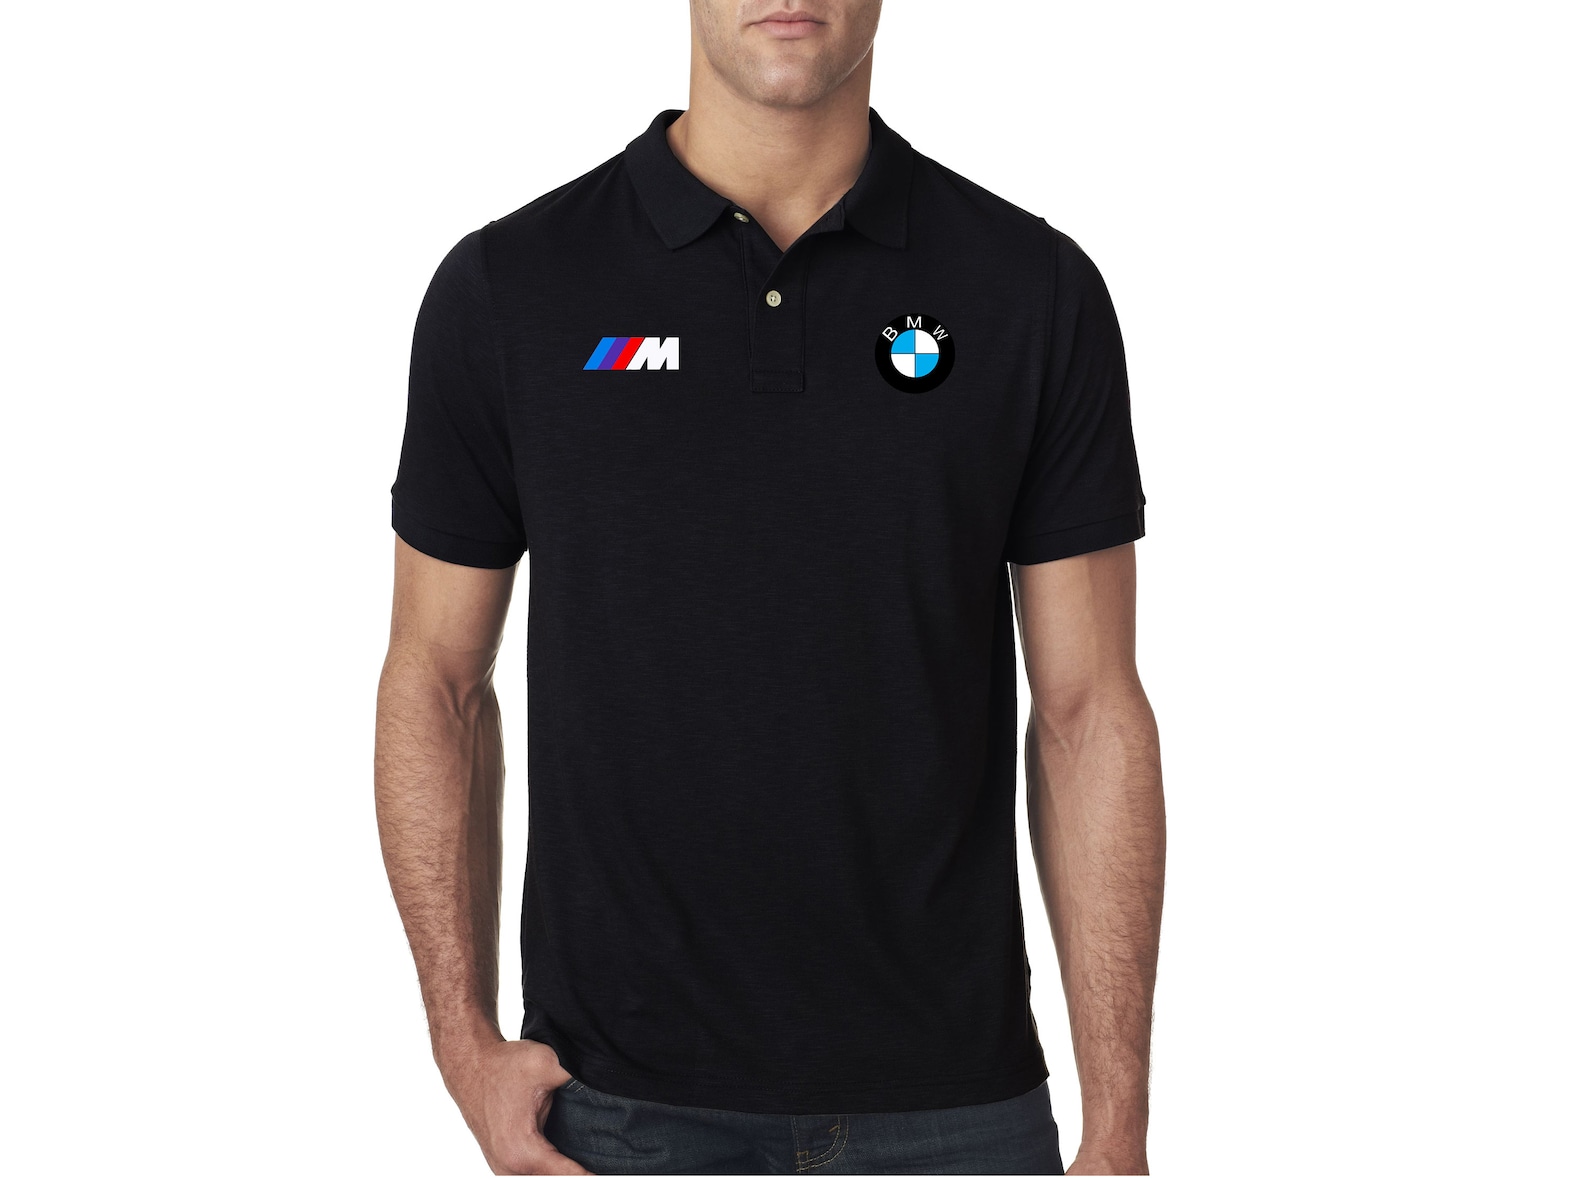 BMW Polo Shirt For Men's | Etsy